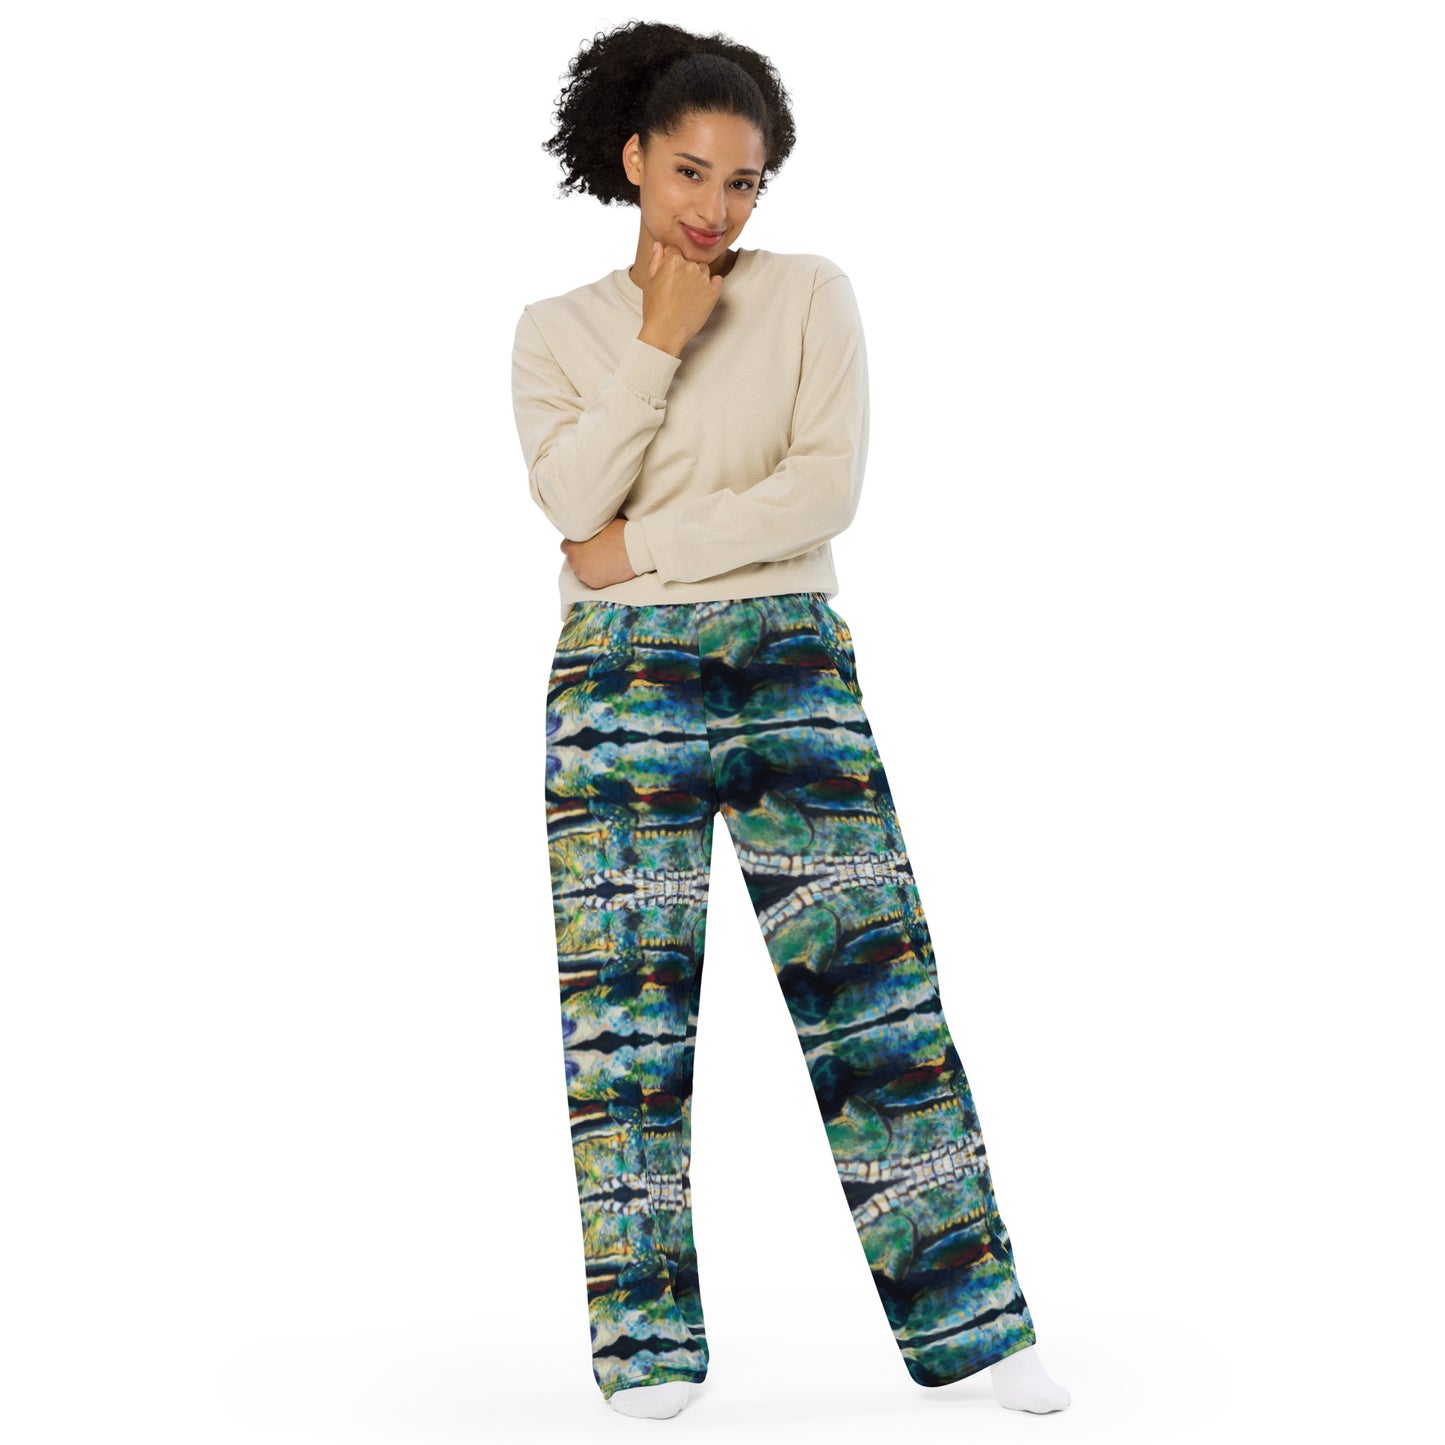 Psychedelic Gator with Reflection All-over print unisex wide-leg pants